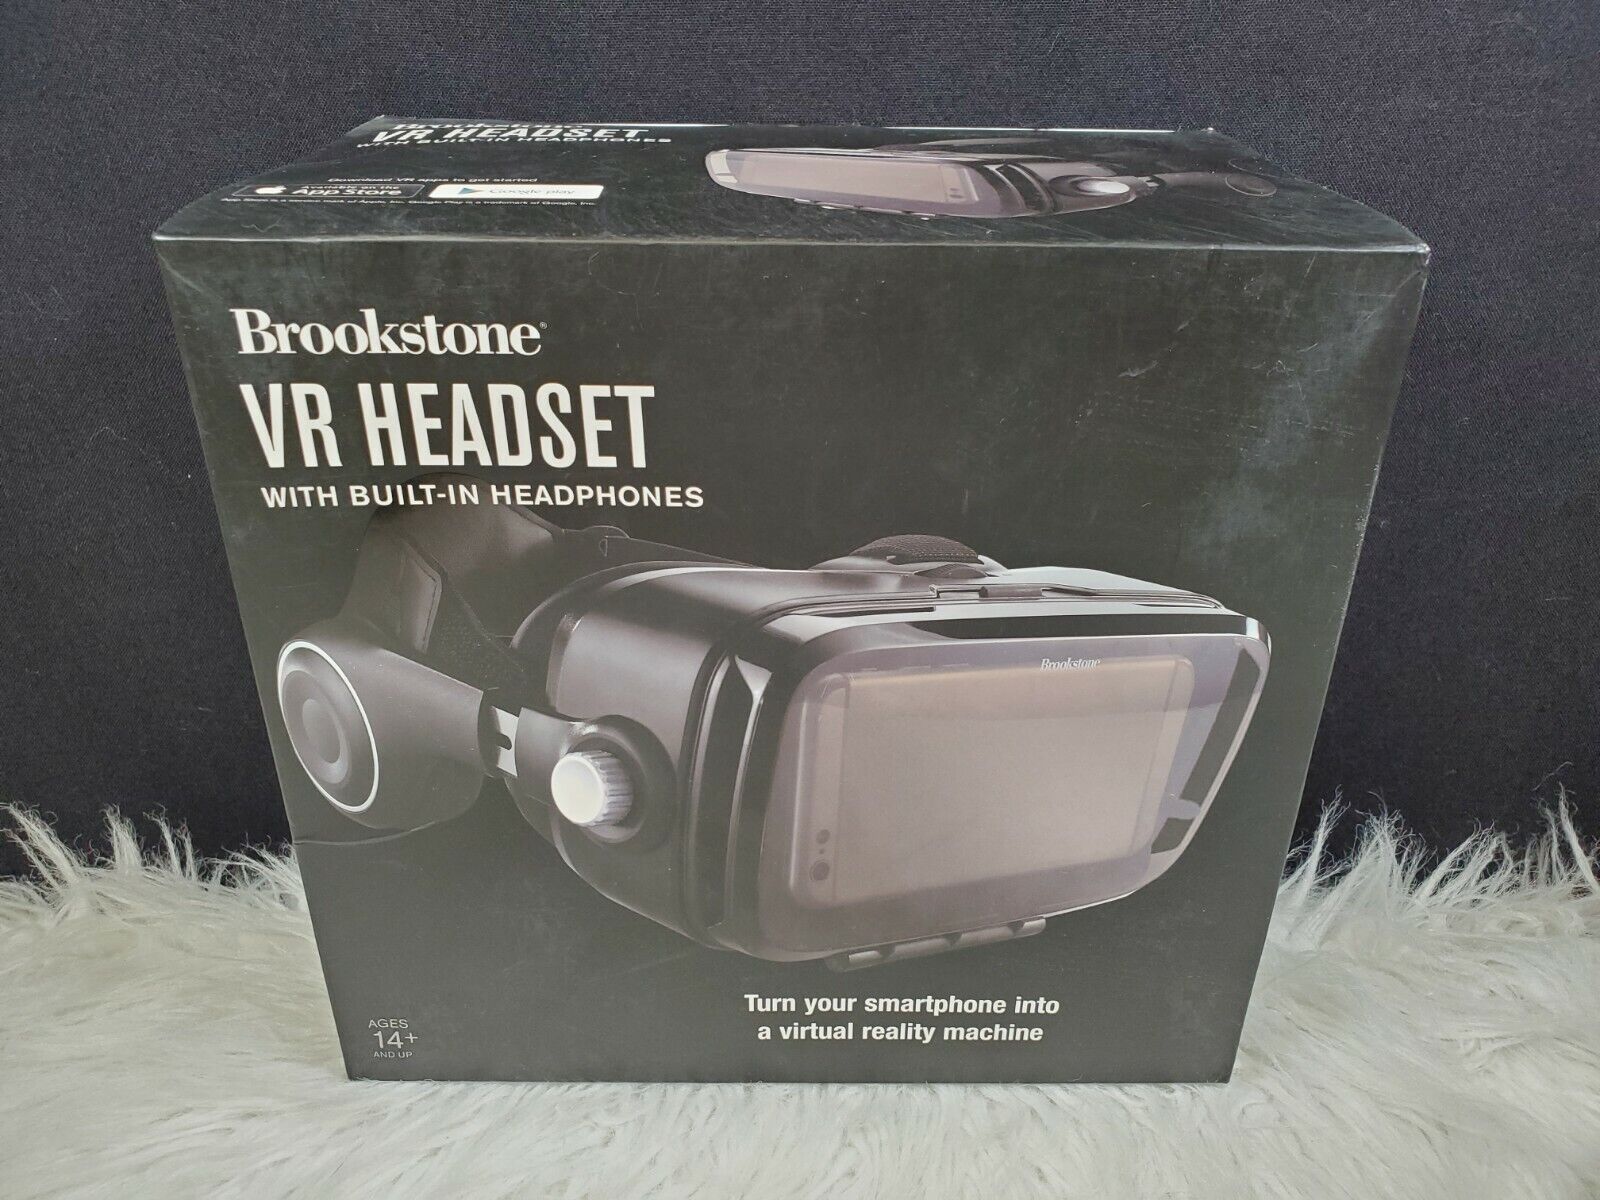 Brookstone VR Max 43% OFF Headset Headphones Easy-to-use Built-In with